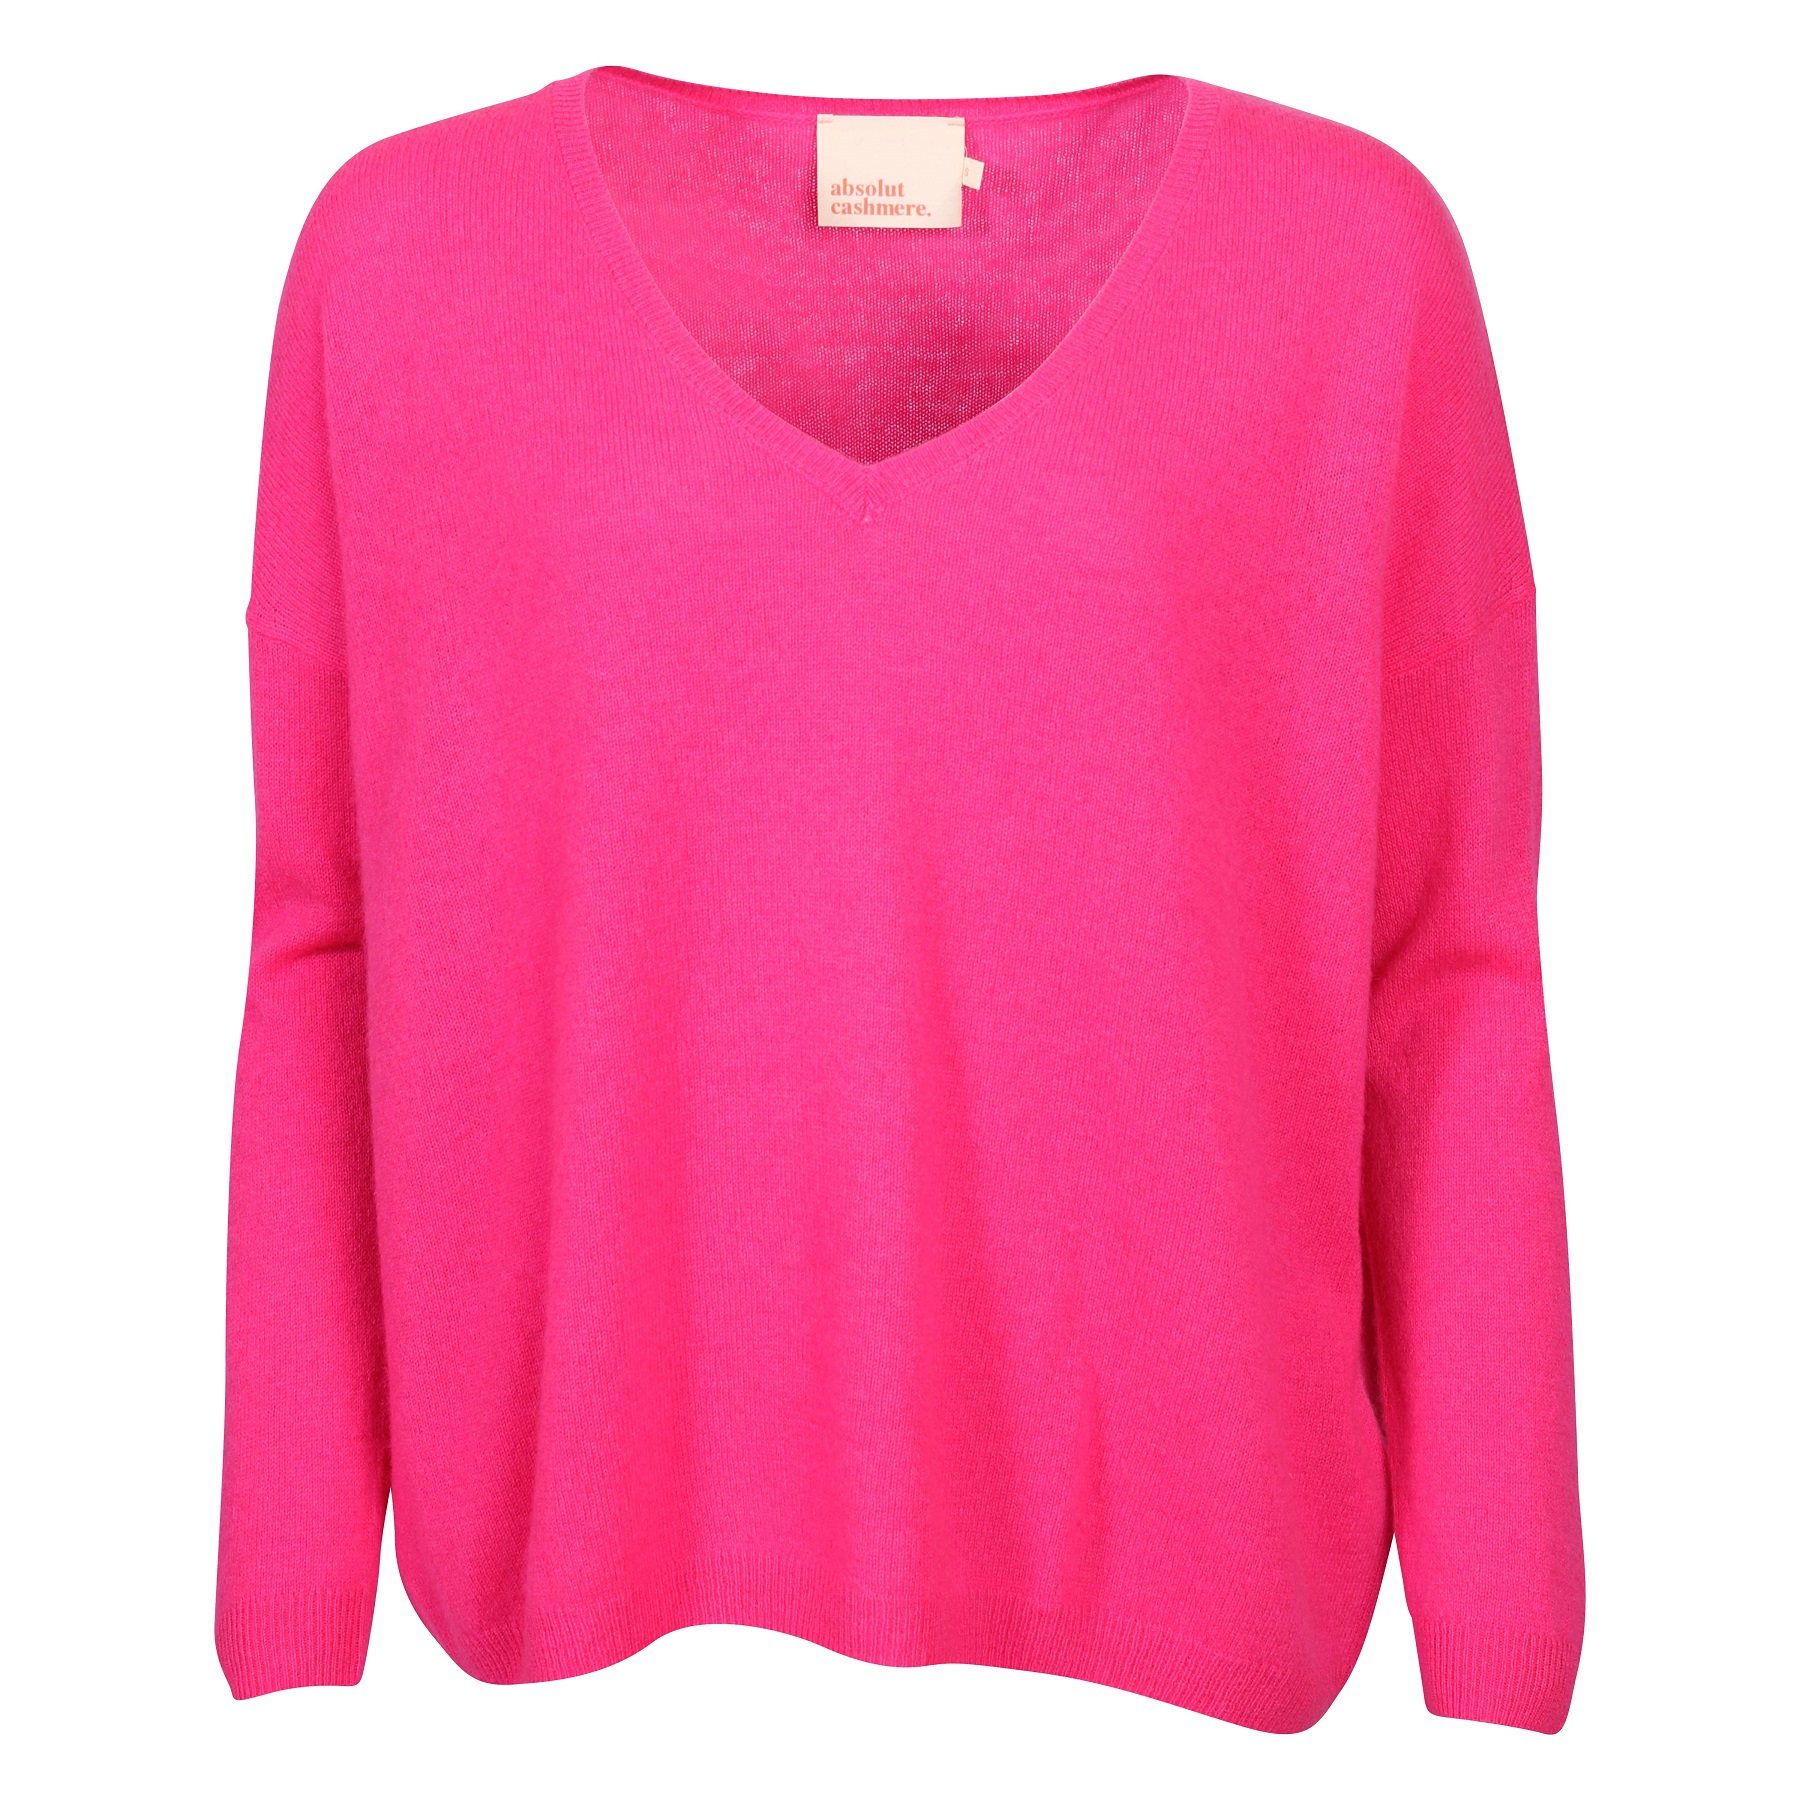 Absolut Cashmere Pullover Angele in Pink S